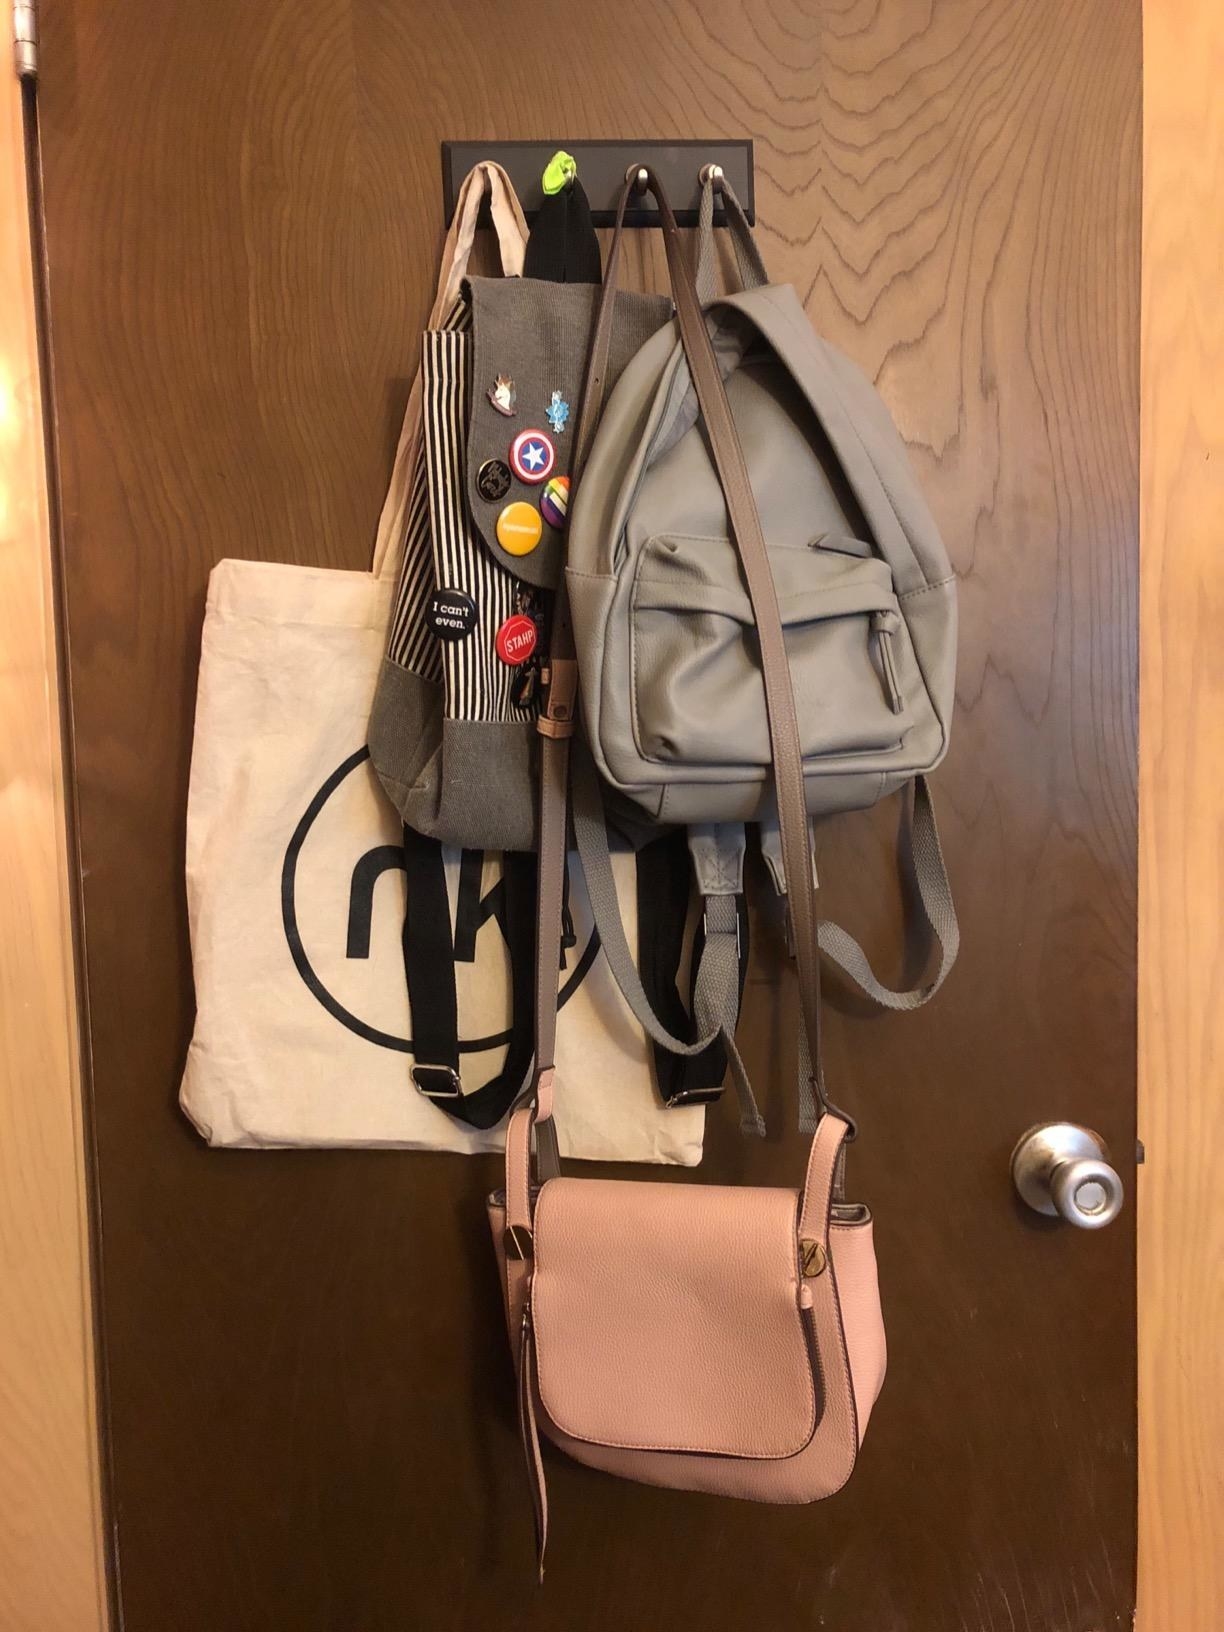 A reviewer&#x27;s bags hung on the four hooks attached to a door